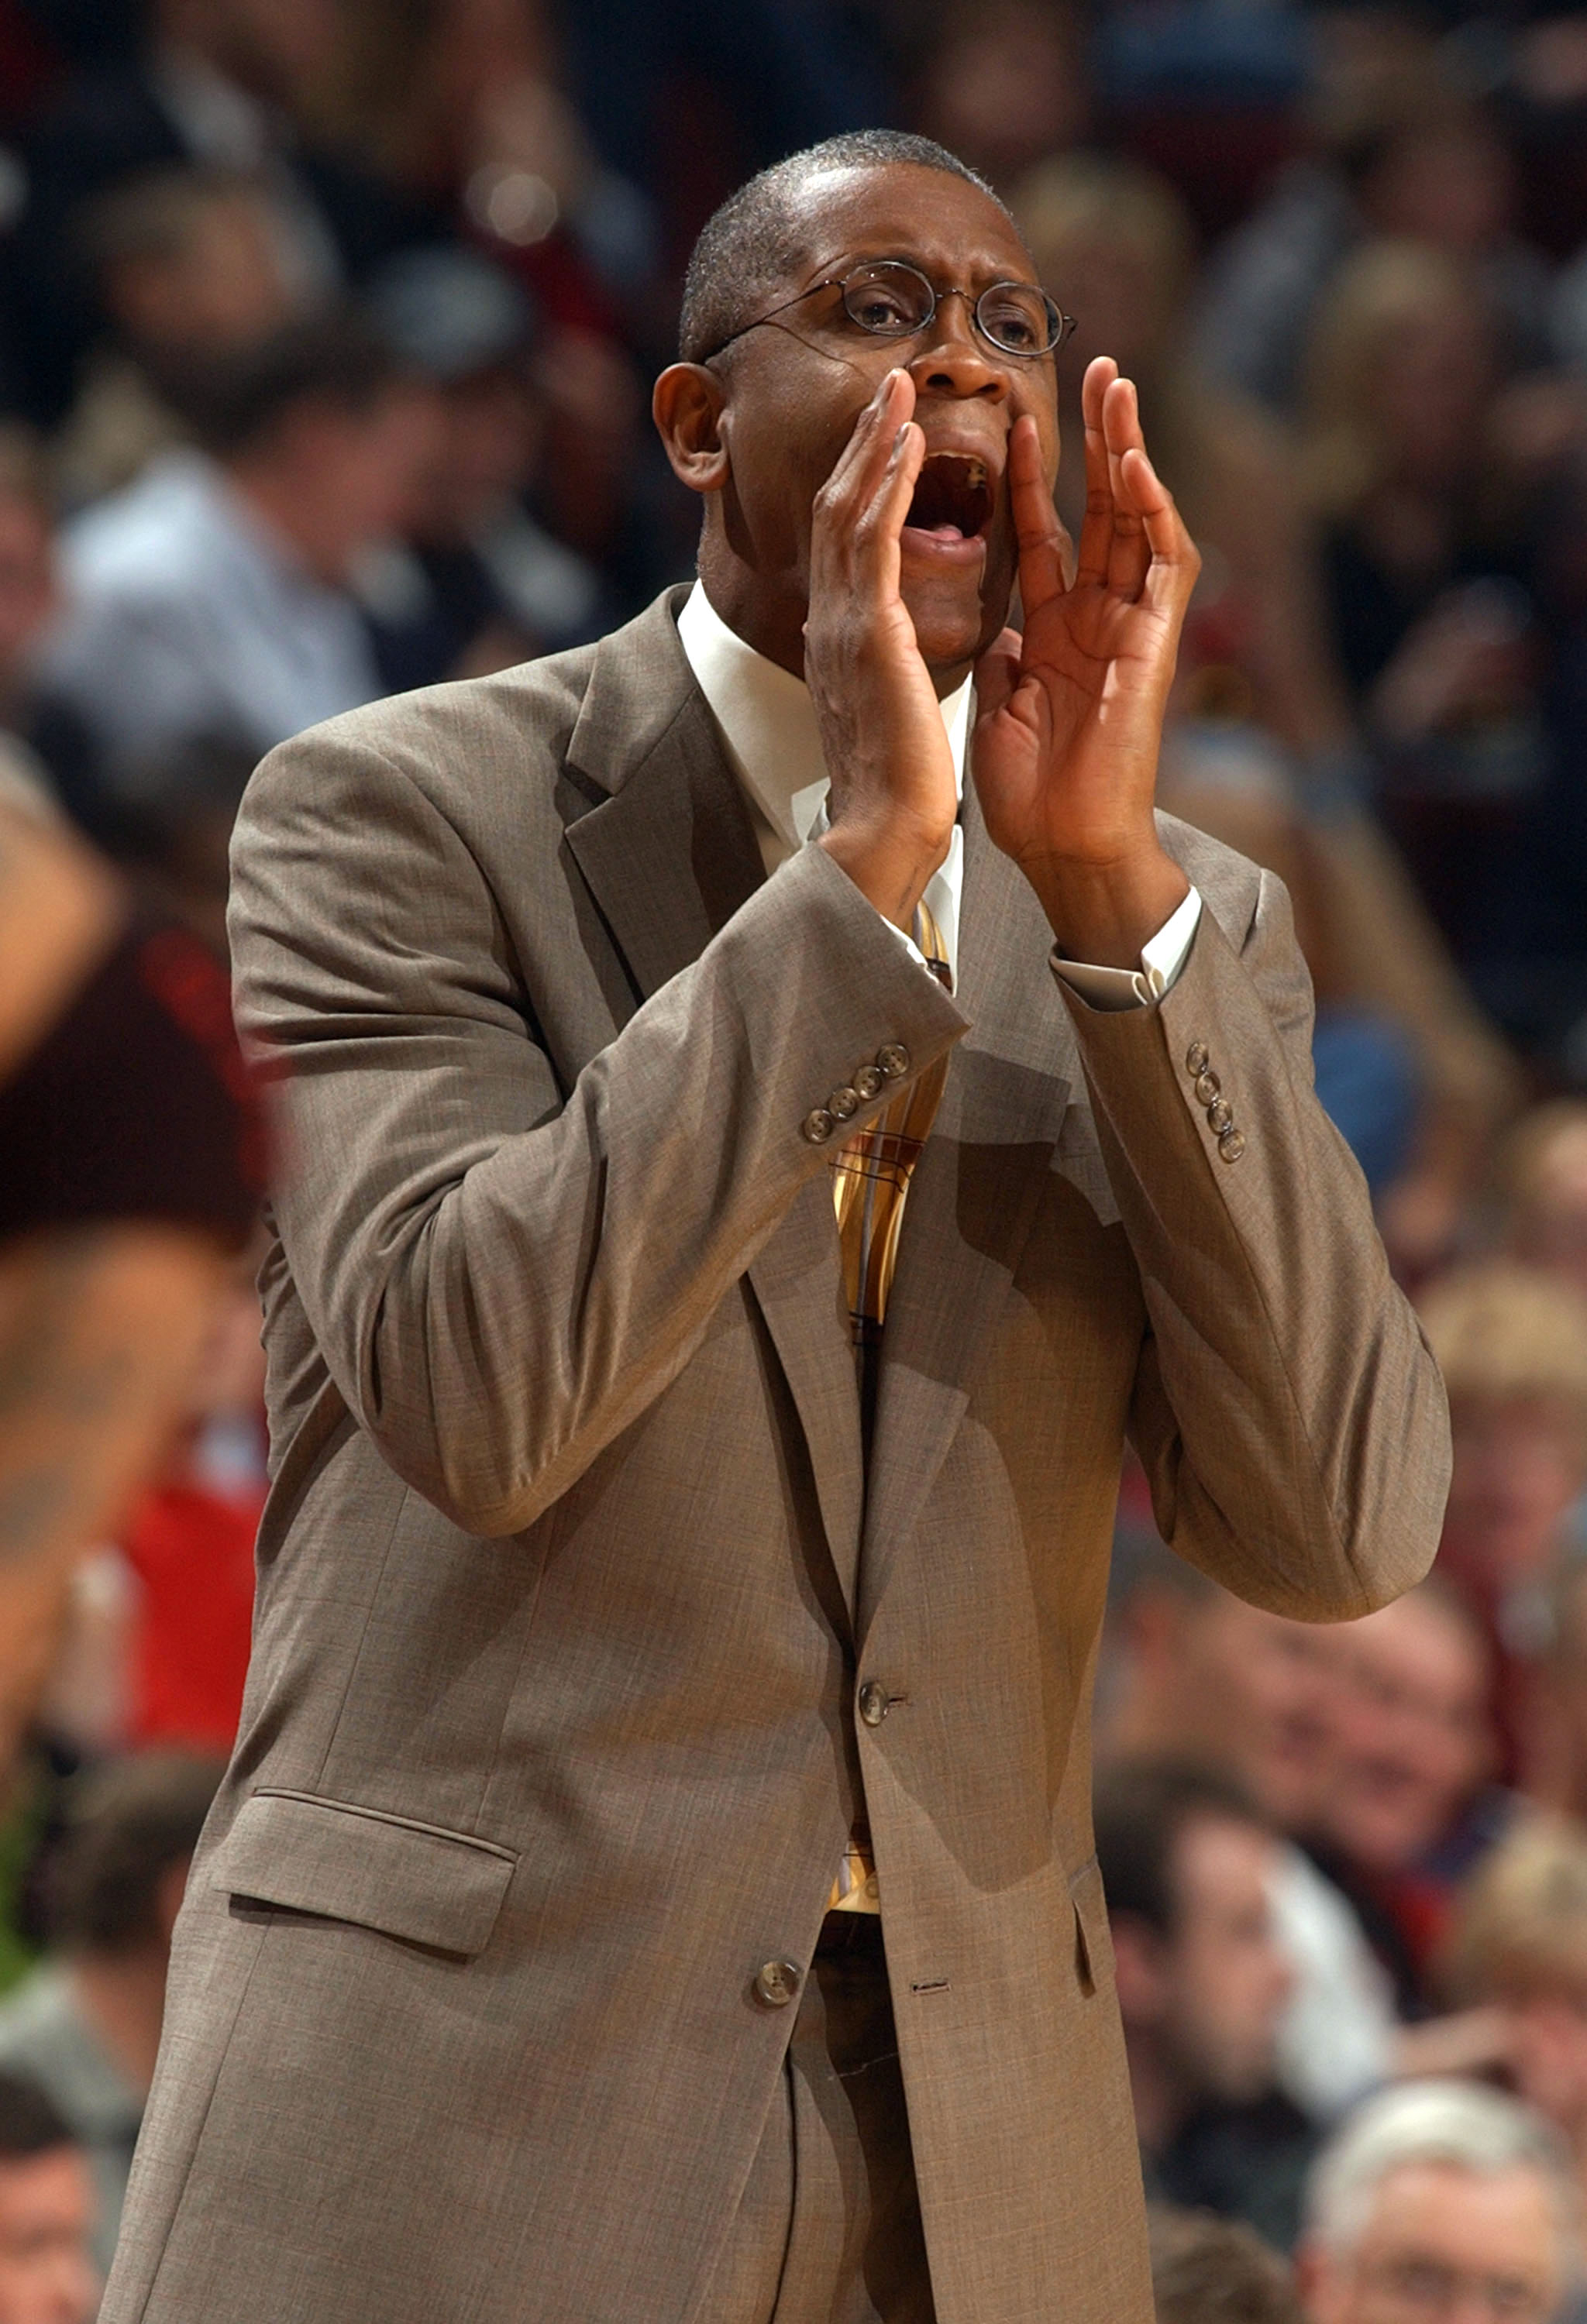 CHICAGO - NOVEMBER 7:  Head coach Bill Cartwright of the Chicago Bulls yells instructions to his team during a game against the Philadelphia 76ers November 7, 2003 at the United Center in Chicago, Illinois. The 76ers defeated the Bulls 106-85. NOTE TO USE